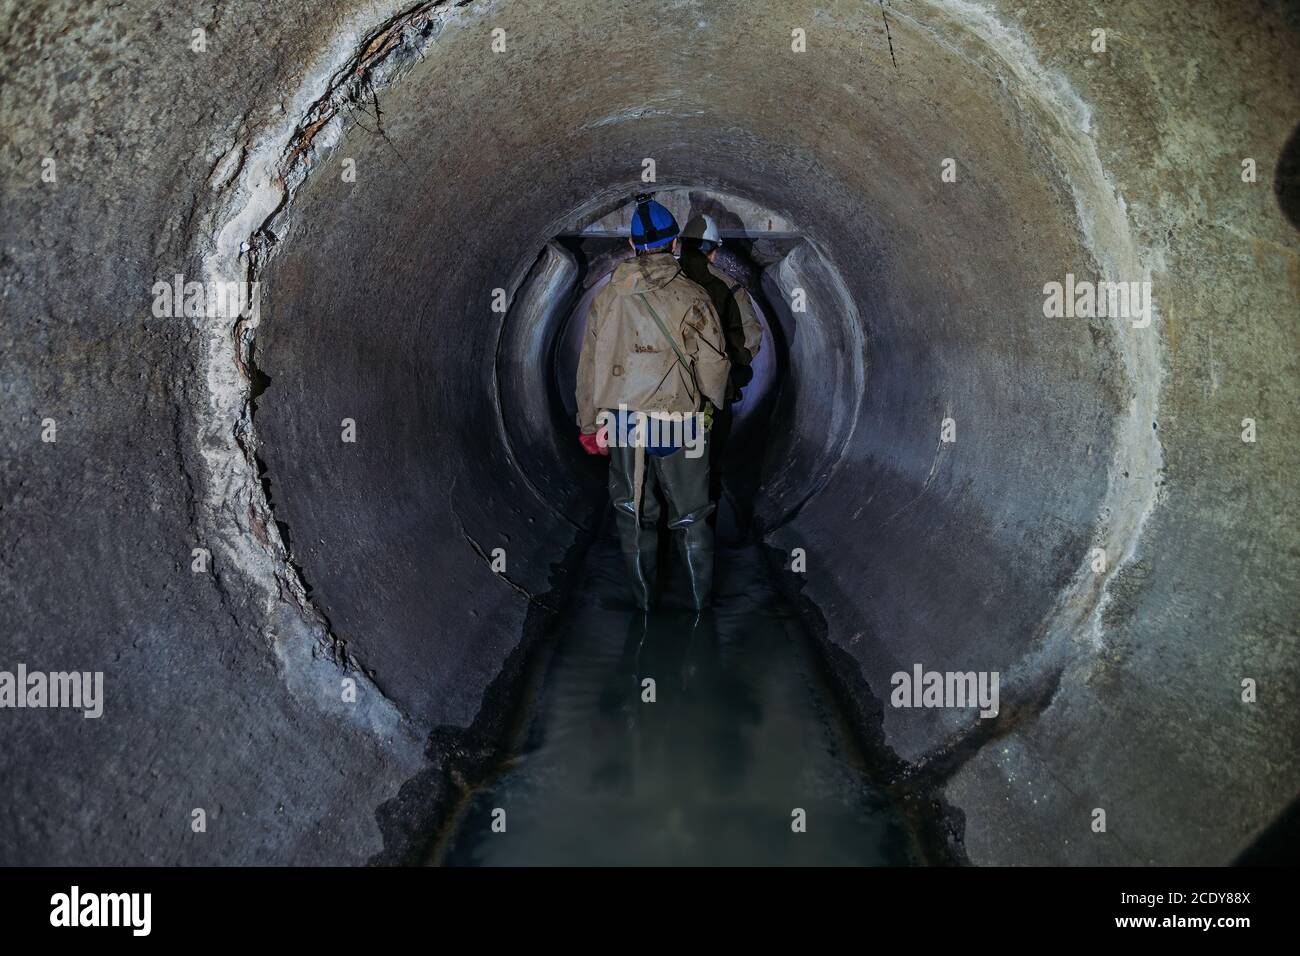 Sewer tunnel worker examines sewer system damage and wastewater leakage Stock Photo